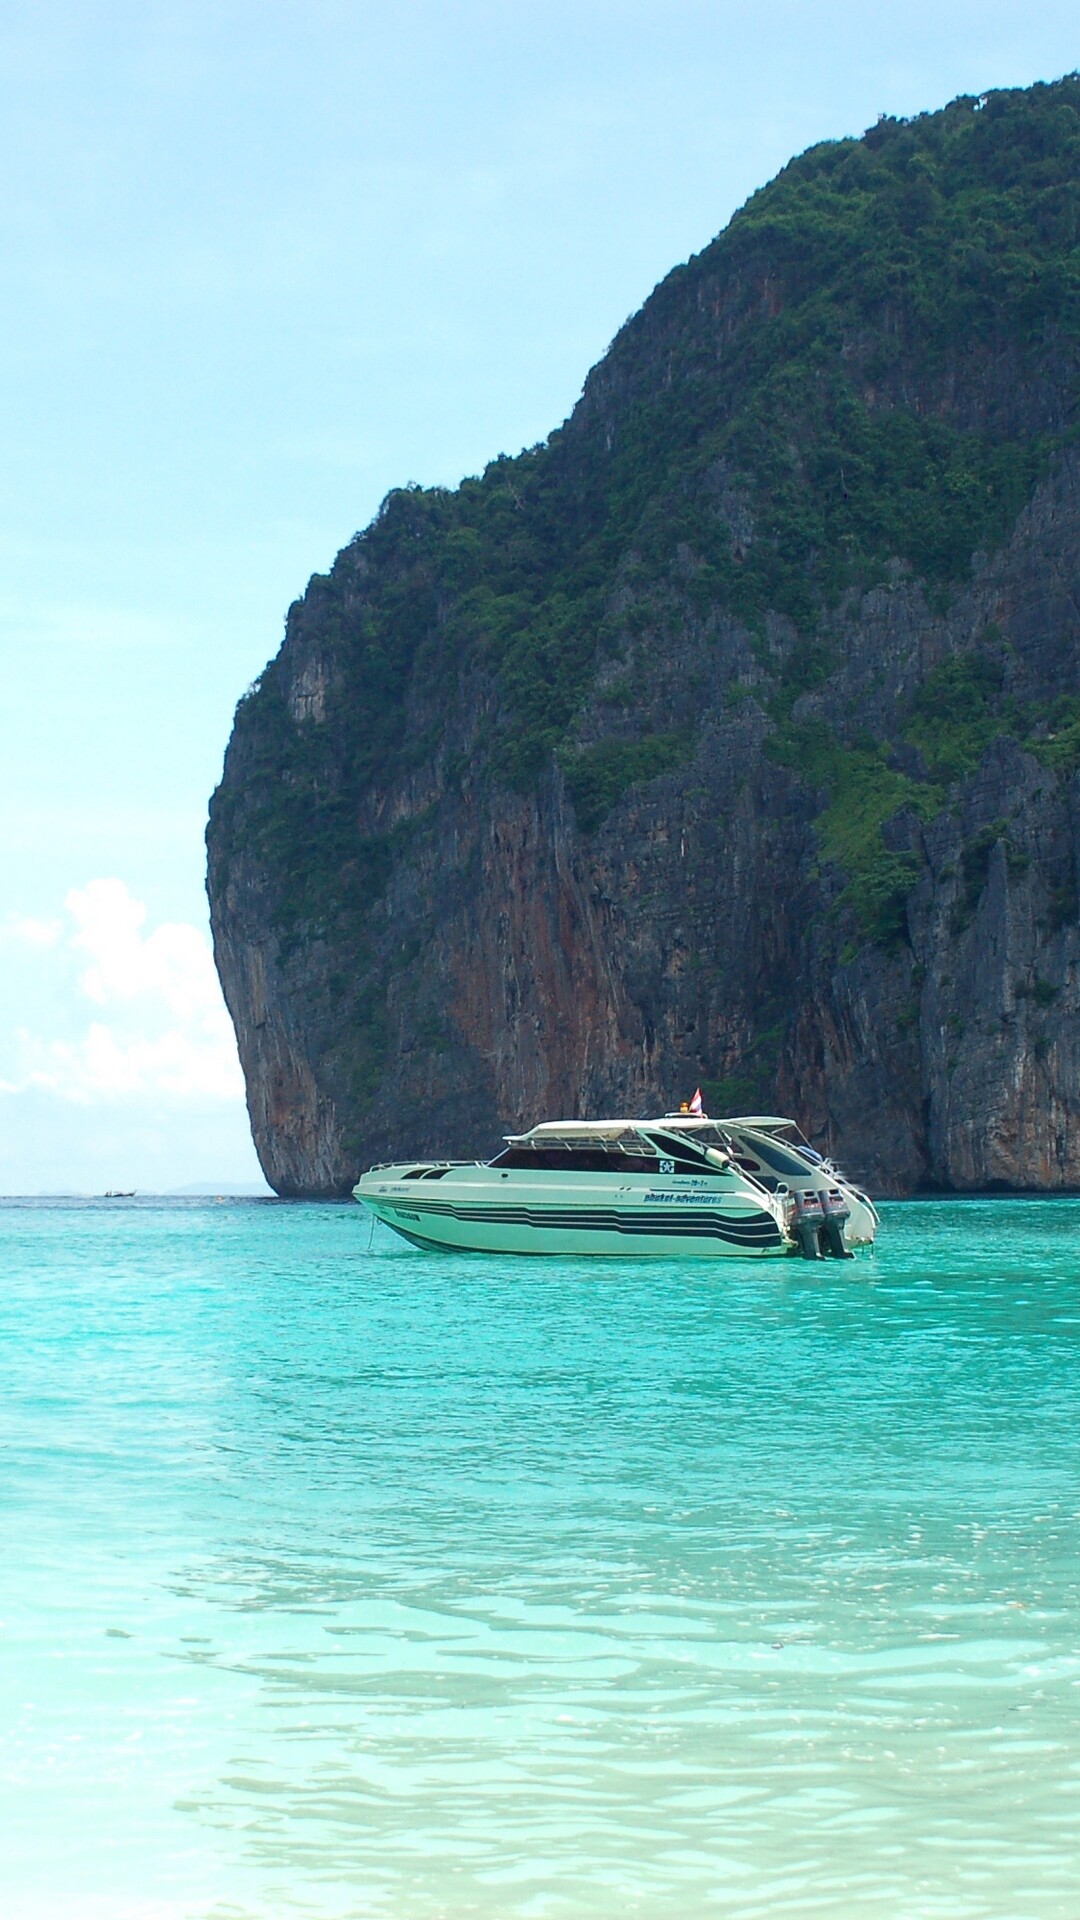 Phi Phi: Island, 90-minute ferry journey from either Phuket, Boat. 1080x1920 Full HD Wallpaper.